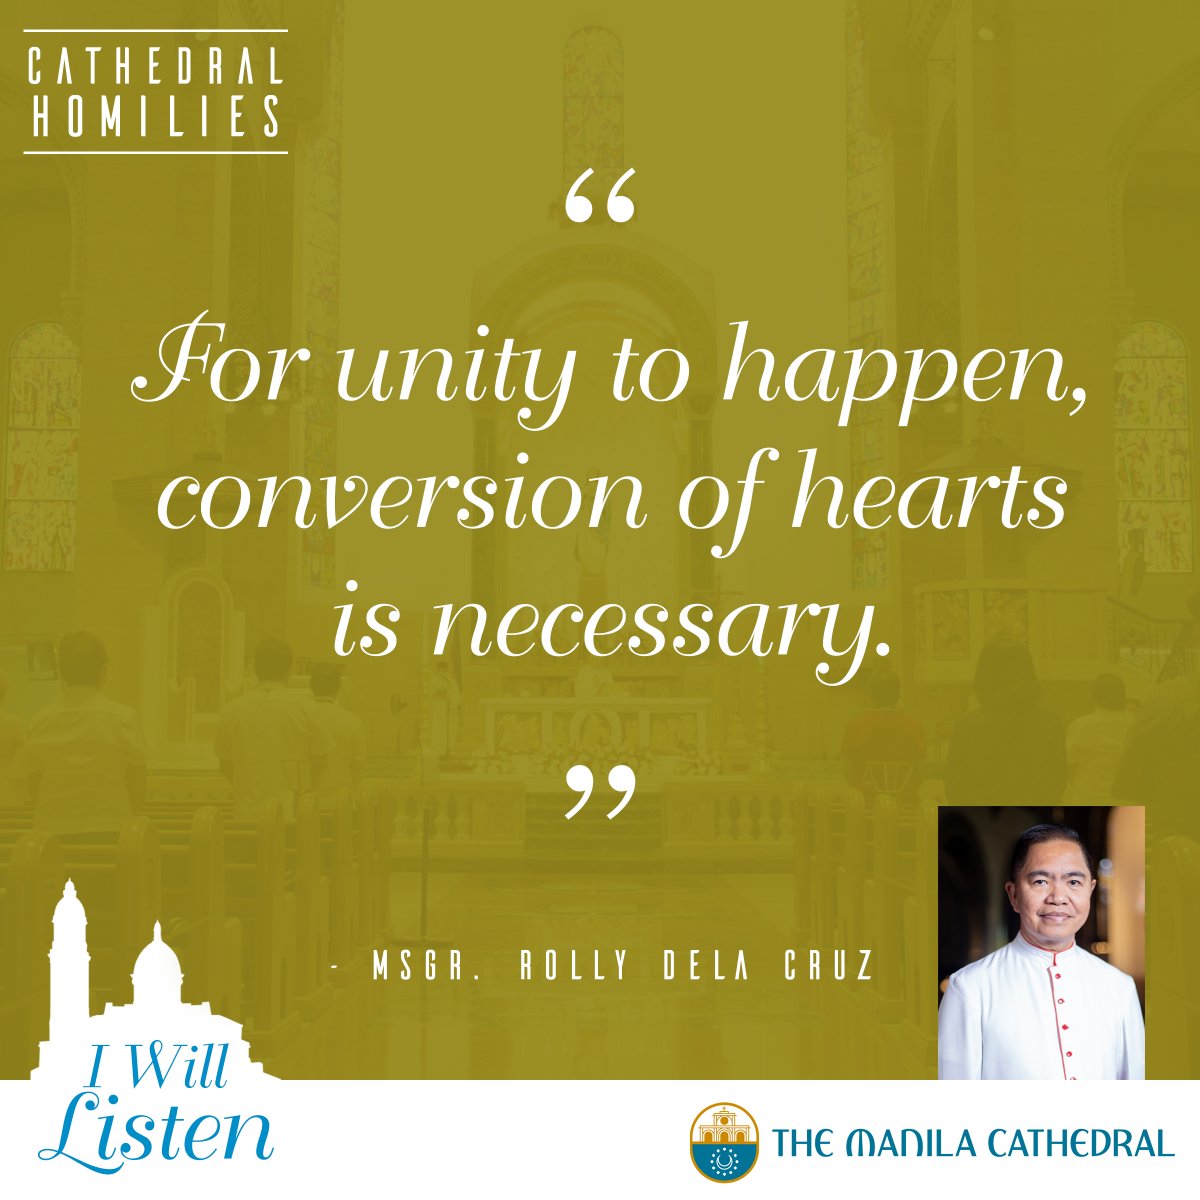 I WILL LISTEN | CATHEDRAL HOMILIES
“For unity to happen, conversion of hearts is necessary.” - Msgr. Rolly dela Cruz

May 16, 2024
Thursday of the Seventh Week of Easter

Watch the full homily here: youtu.be/PUhOUtoLiFQ

#ManilaCathedral #homily #dailymass